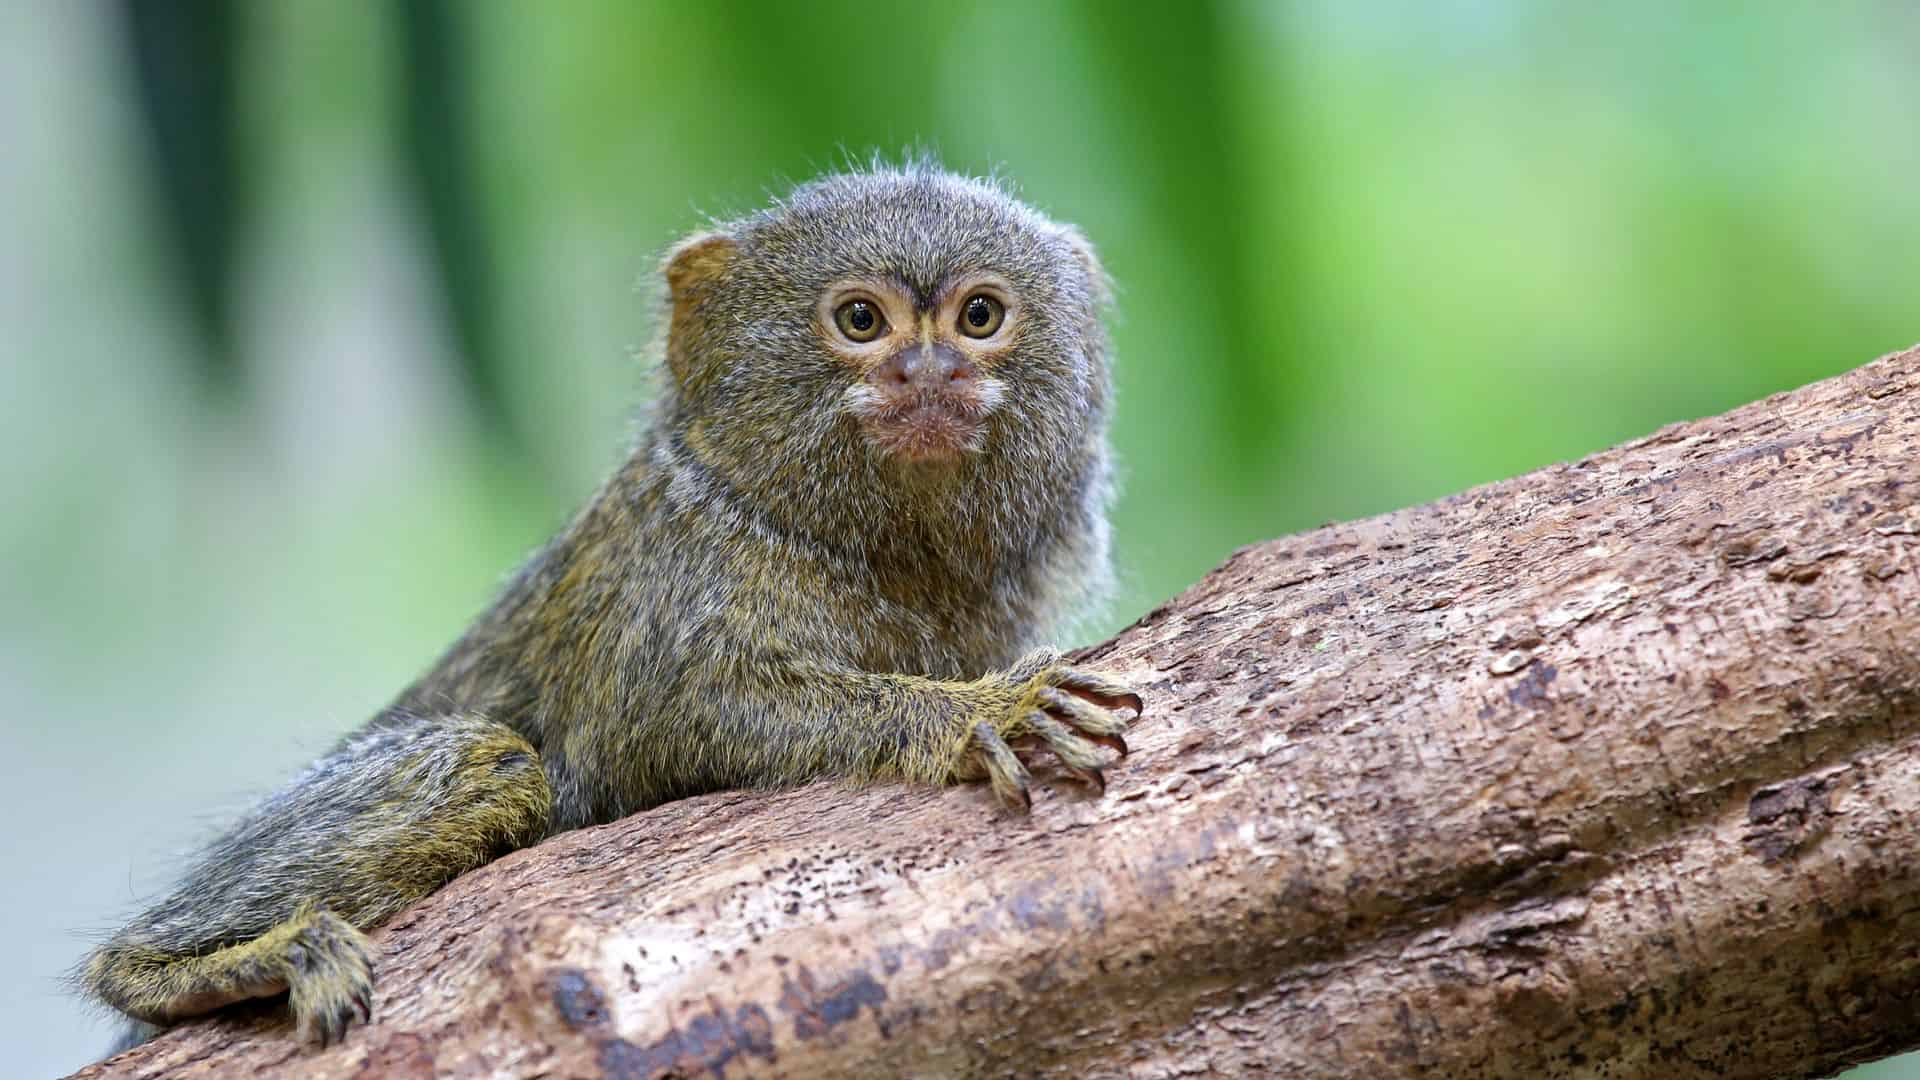 A picture of a marmoset clinging to a branch.